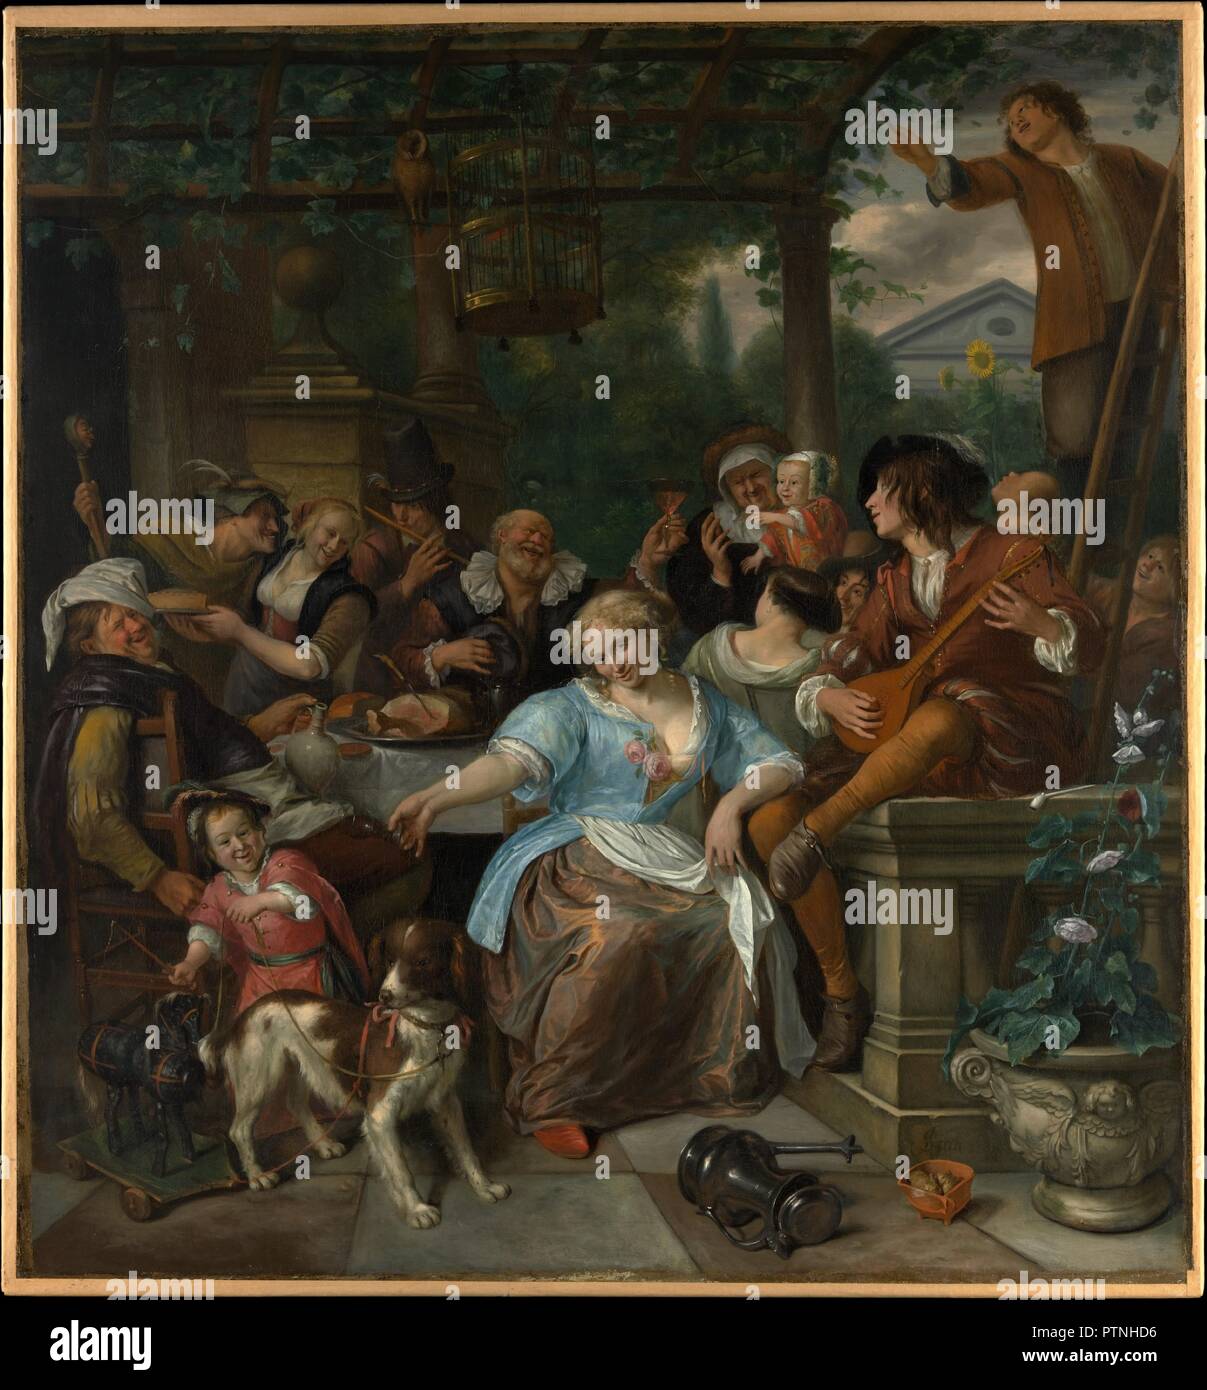 Merry Company on a Terrace. Artist: Jan Steen (Dutch, Leiden 1626-1679 Leiden). Dimensions: 55 1/2 x 51 3/4 in. (141 x 131.4 cm). Date: ca. 1670.  In this late painting of about 1673-75, Steen casts himself as the inebriated innkeeper on the left. The artist's second wife, Maria, probably modeled for the provocatively posed hostess (she wears an apron) in the center. Her glass and the fat man's jug are sexually suggestive, but the woman's familiarity with the young musician and the shape of his cittern suggest that he has more to offer her. The overdressed boy serves as a marginal remark about Stock Photo